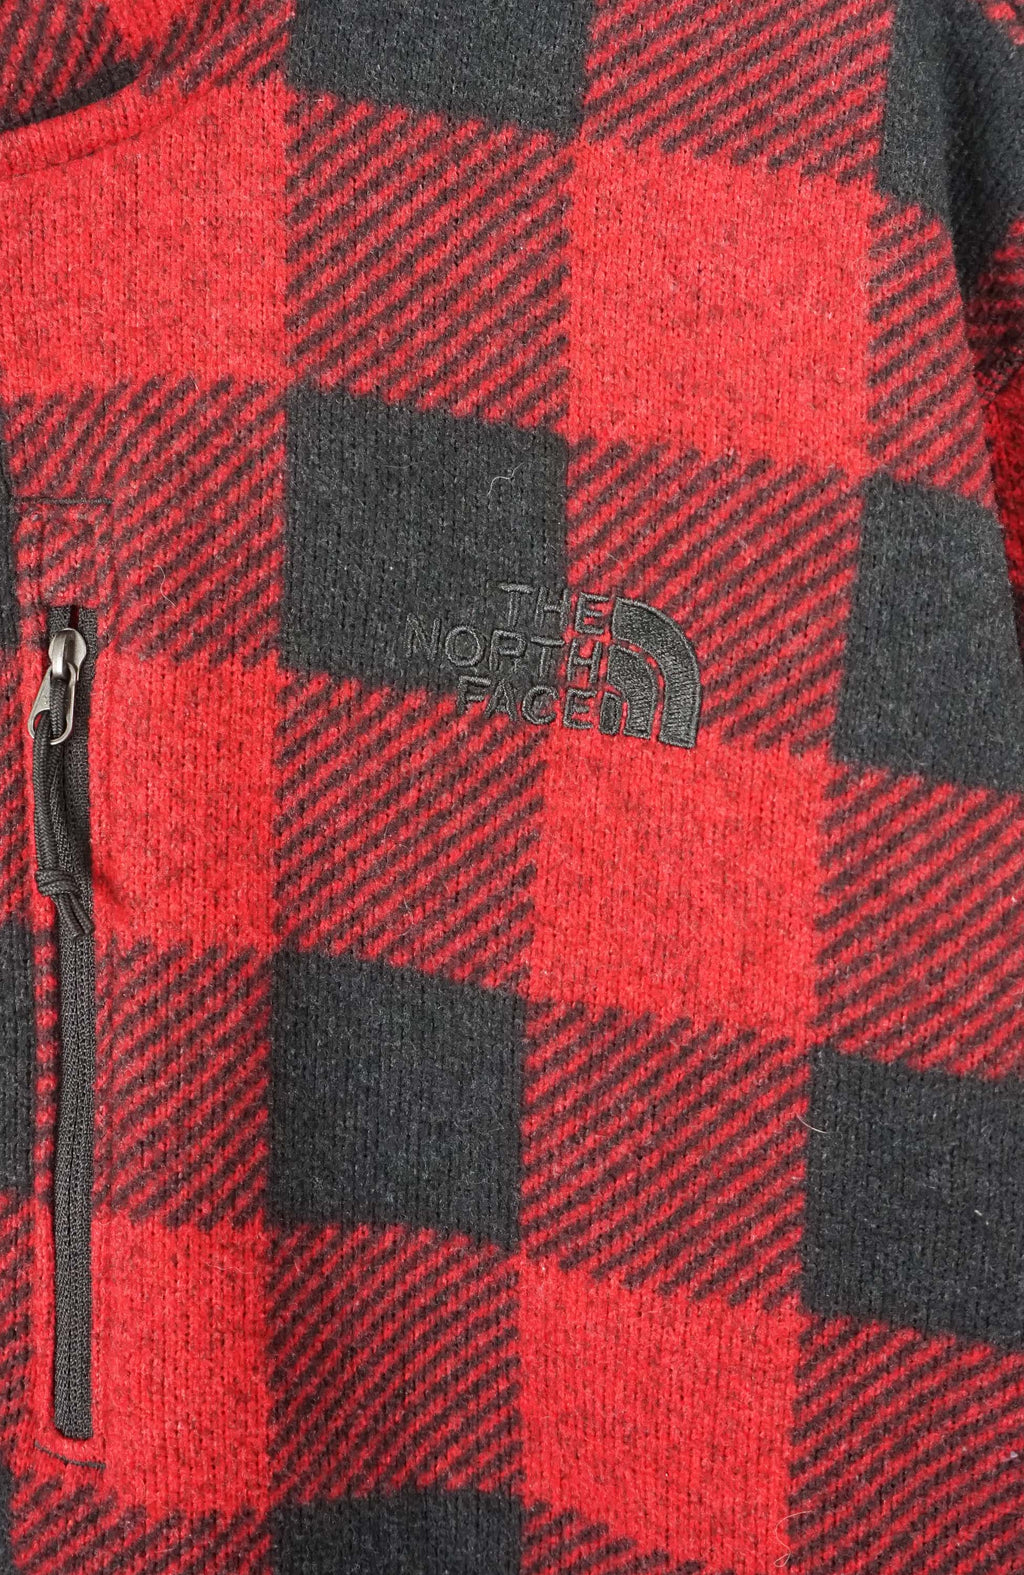 VINTAGE THE NORTH FACE 1/4 ZIP SWEATER (XXL) 